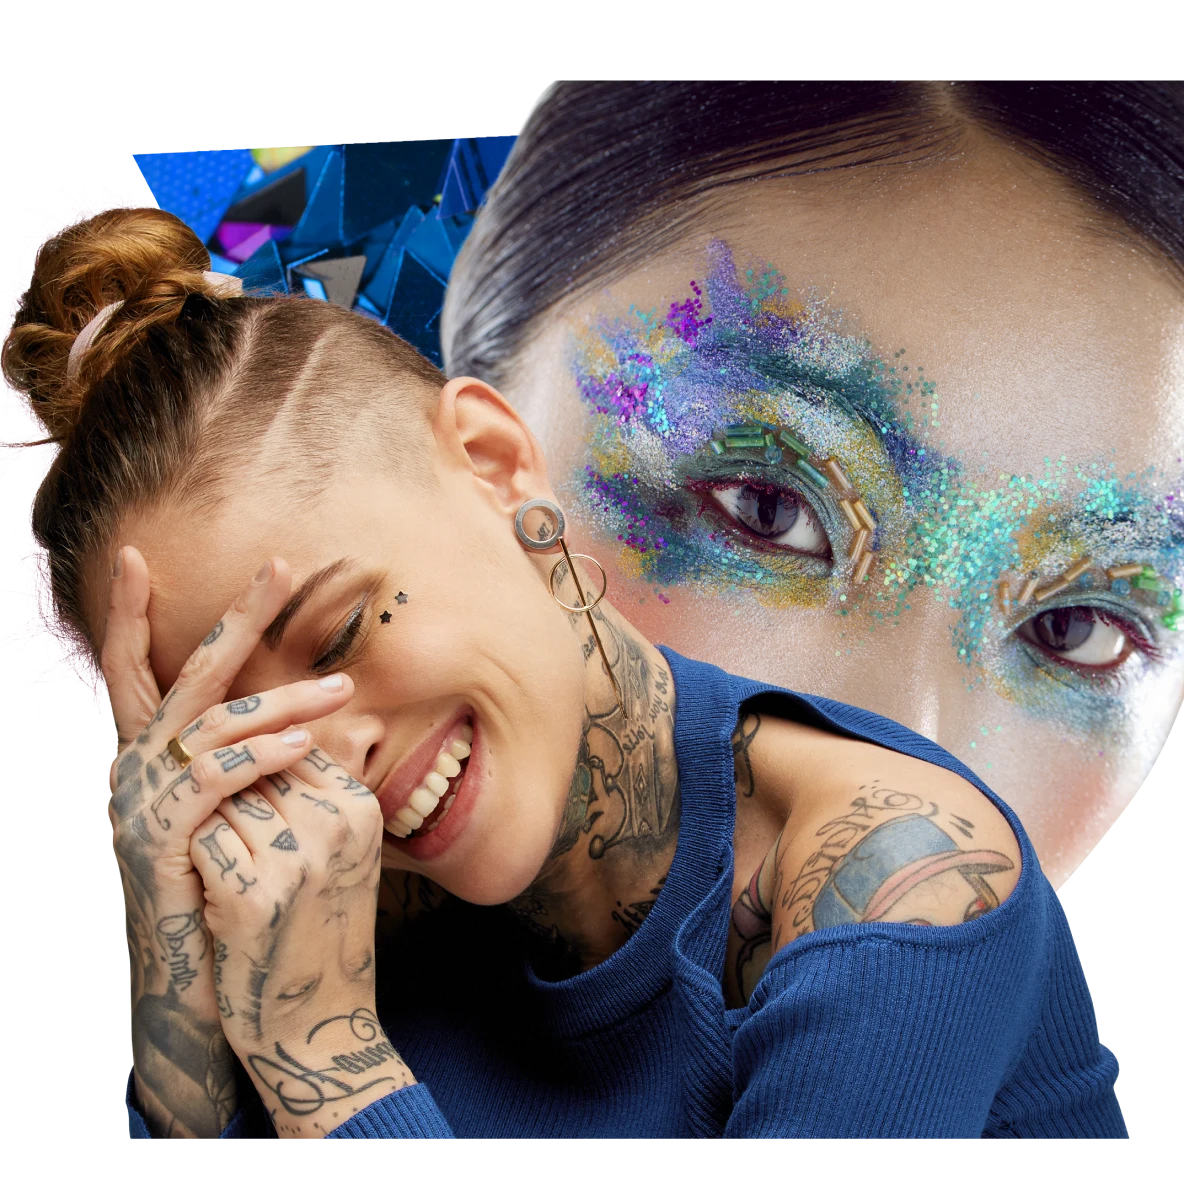 A woman with hand tattoos and a top ponytail smiles, partially covering her face with her hands. A woman with vibrant blue eye make-up is in the background.